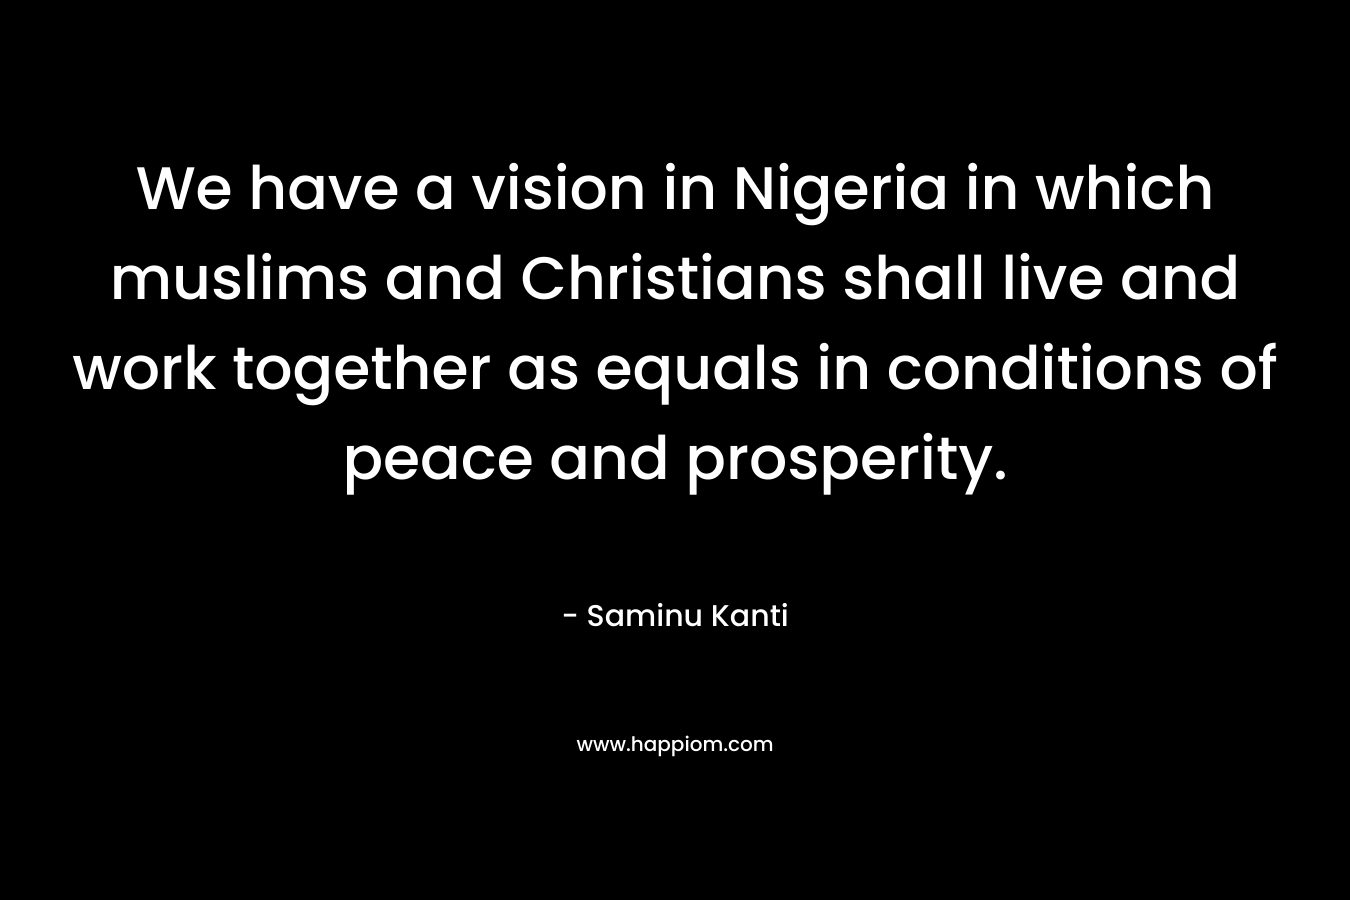 We have a vision in Nigeria in which muslims and Christians shall live and work together as equals in conditions of peace and prosperity.